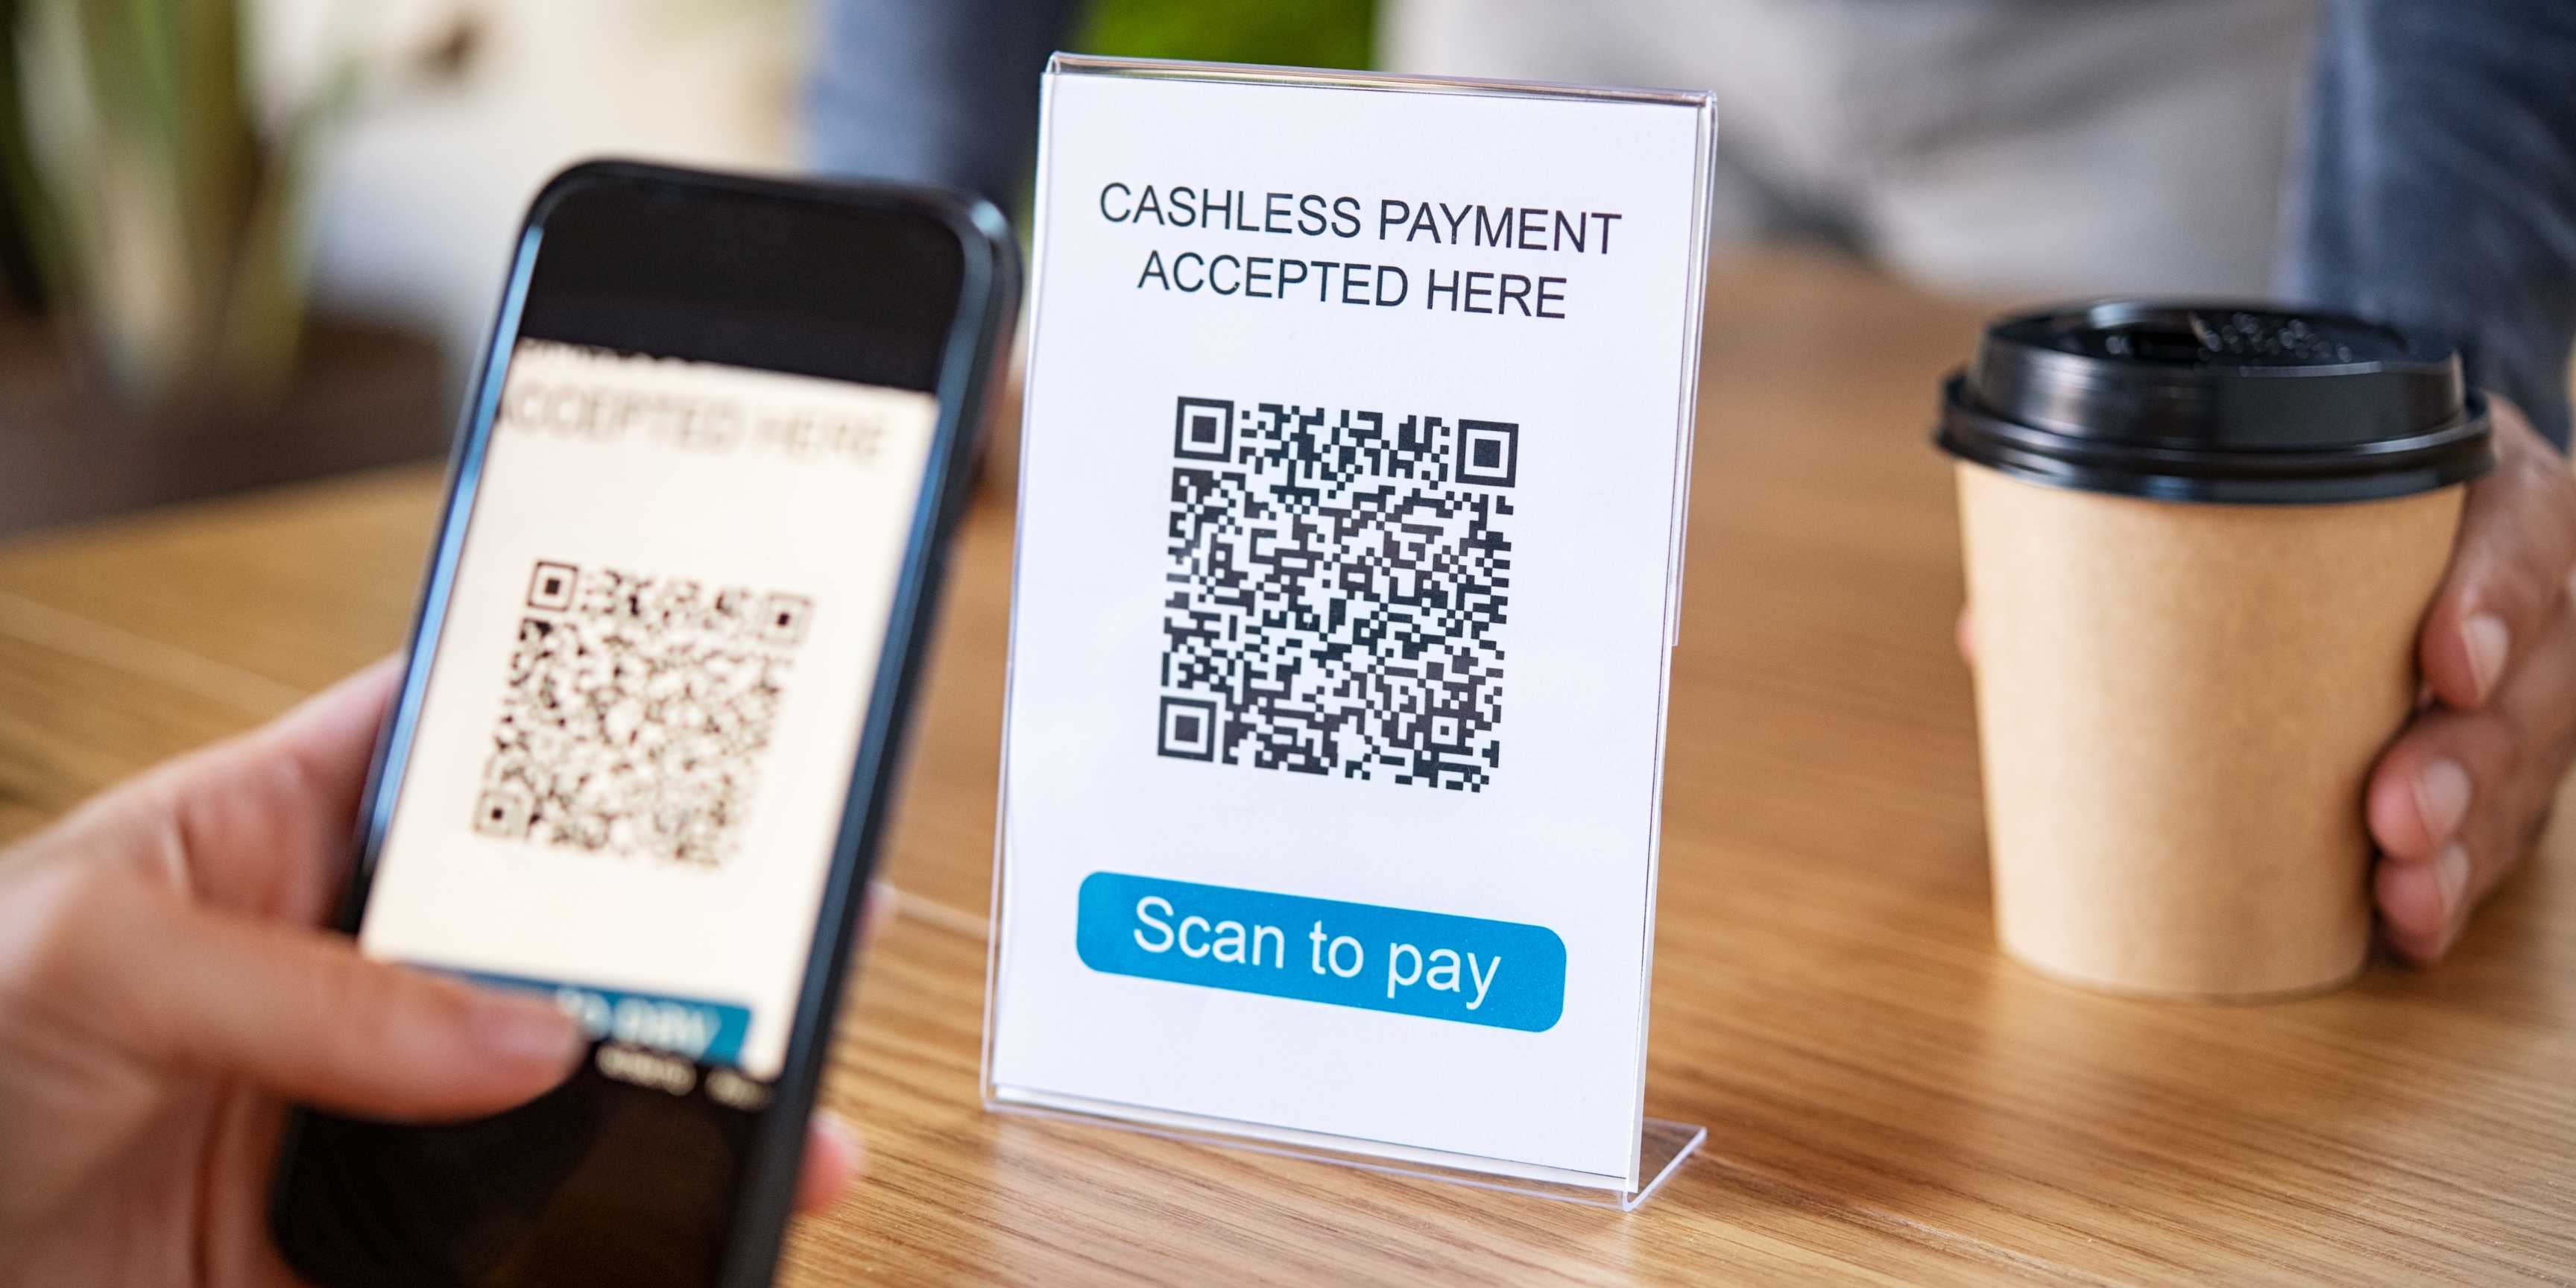 Hackers Hijacking QR Codes in Pay Apps